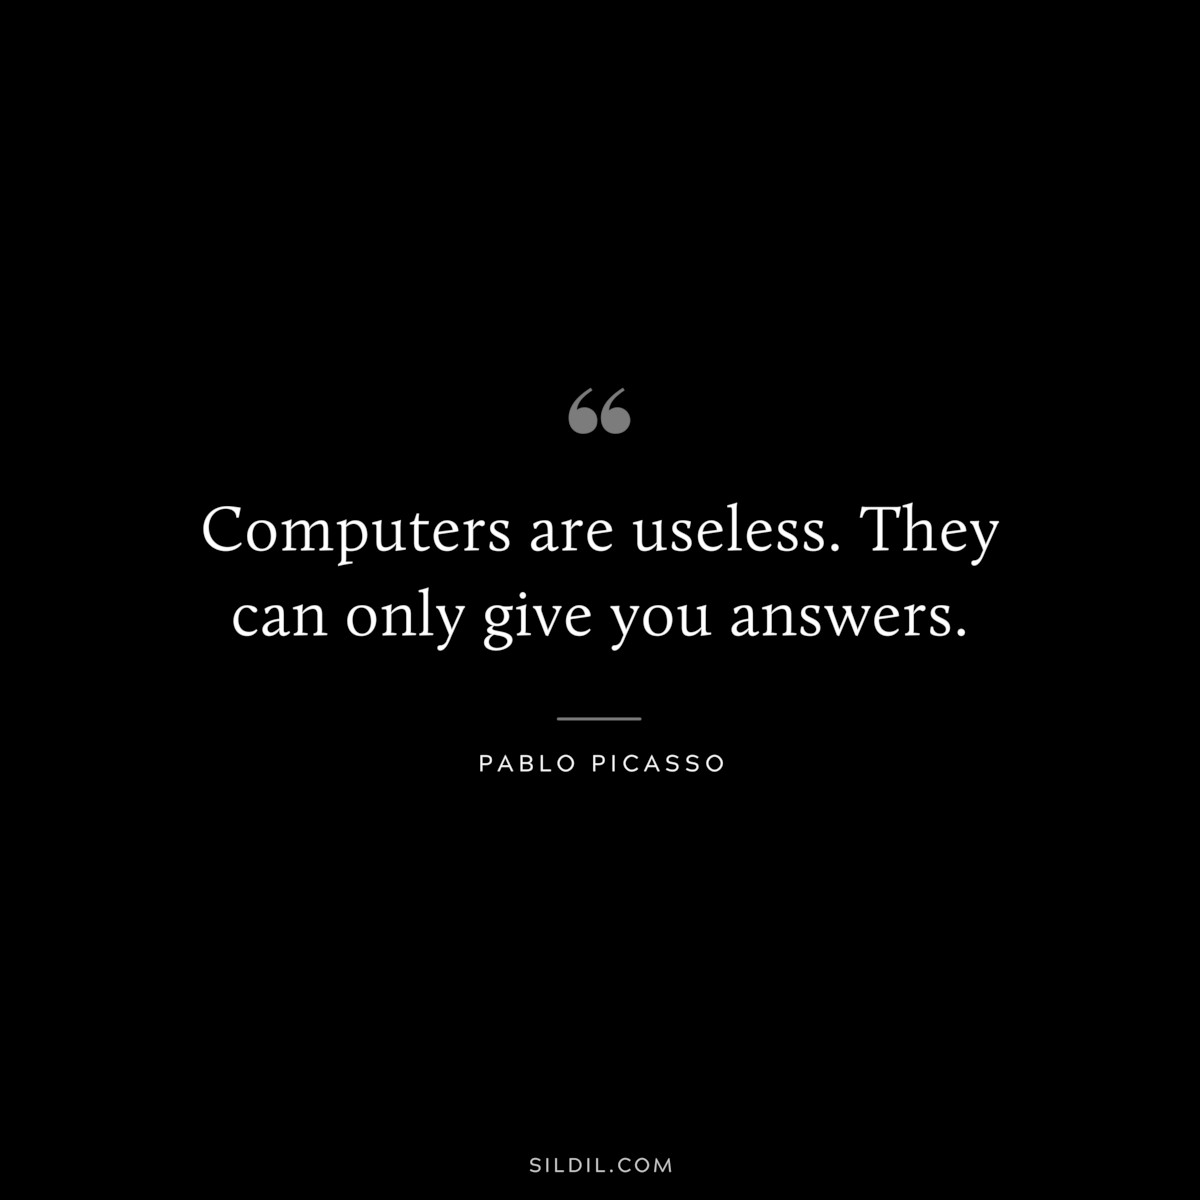 Computers are useless. They can only give you answers. ― Pablo Picasso